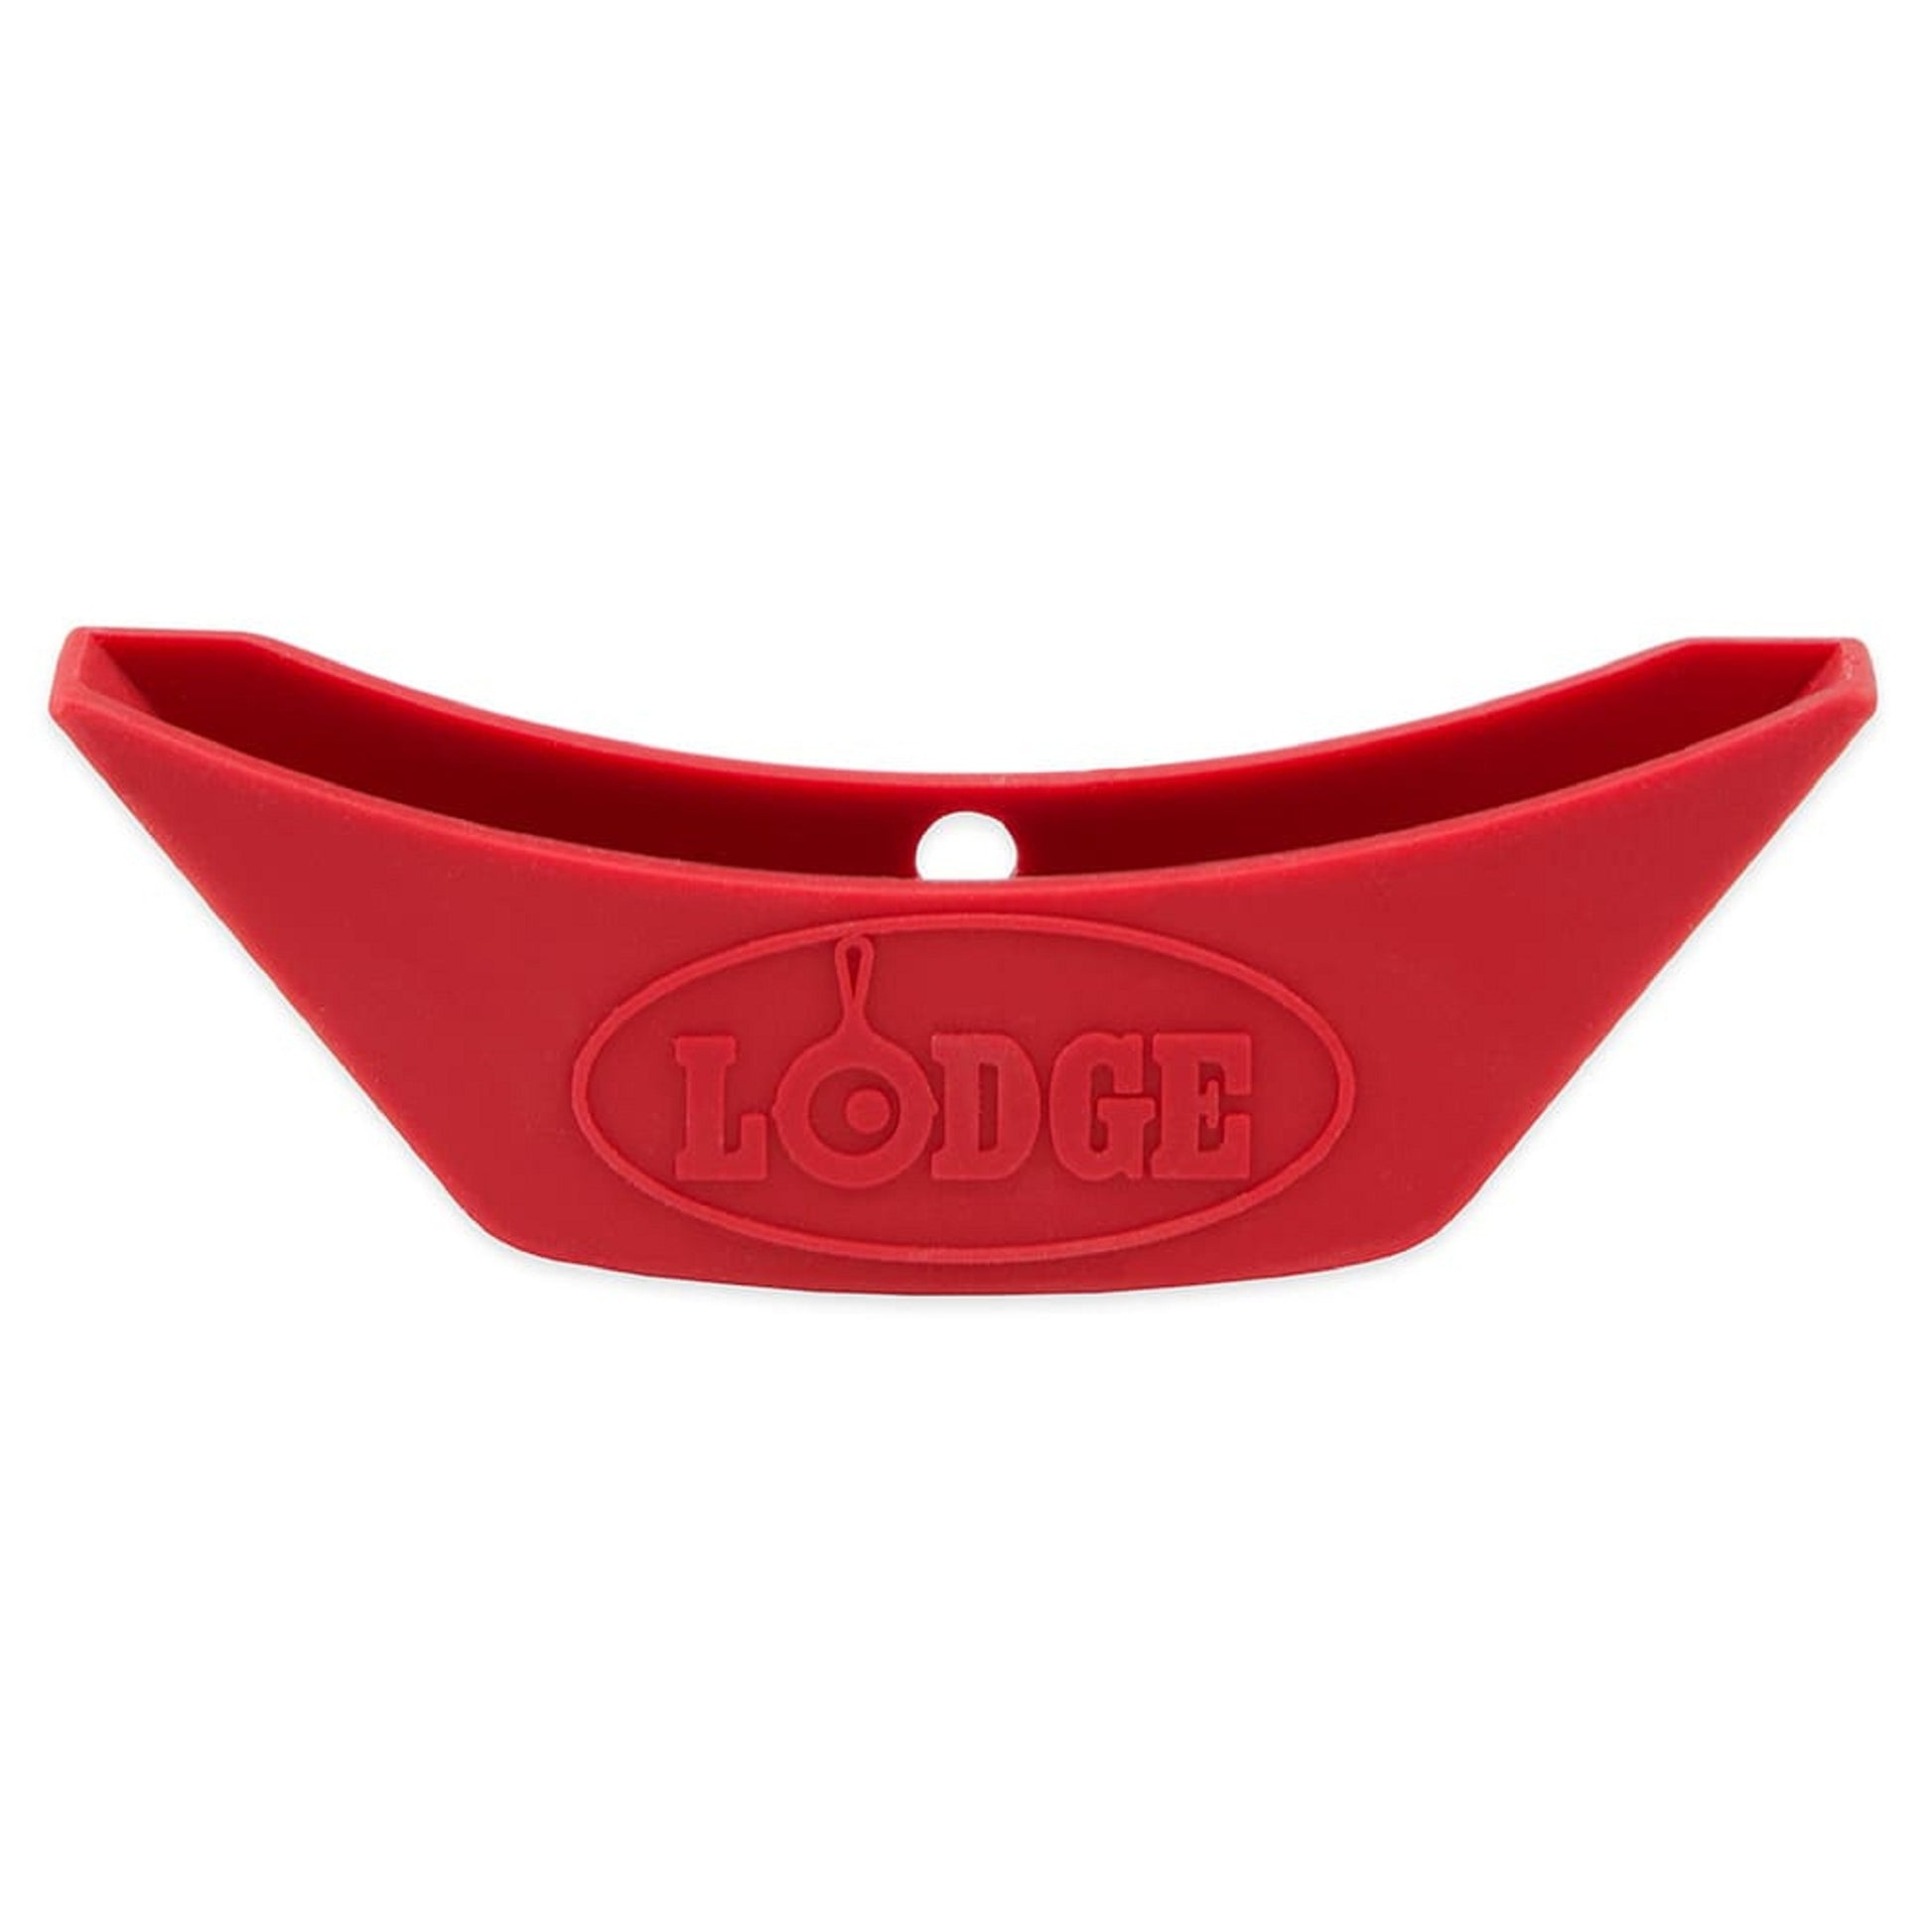 Lodge Silicone Assist Handle Holder, Red, Sold by at Home